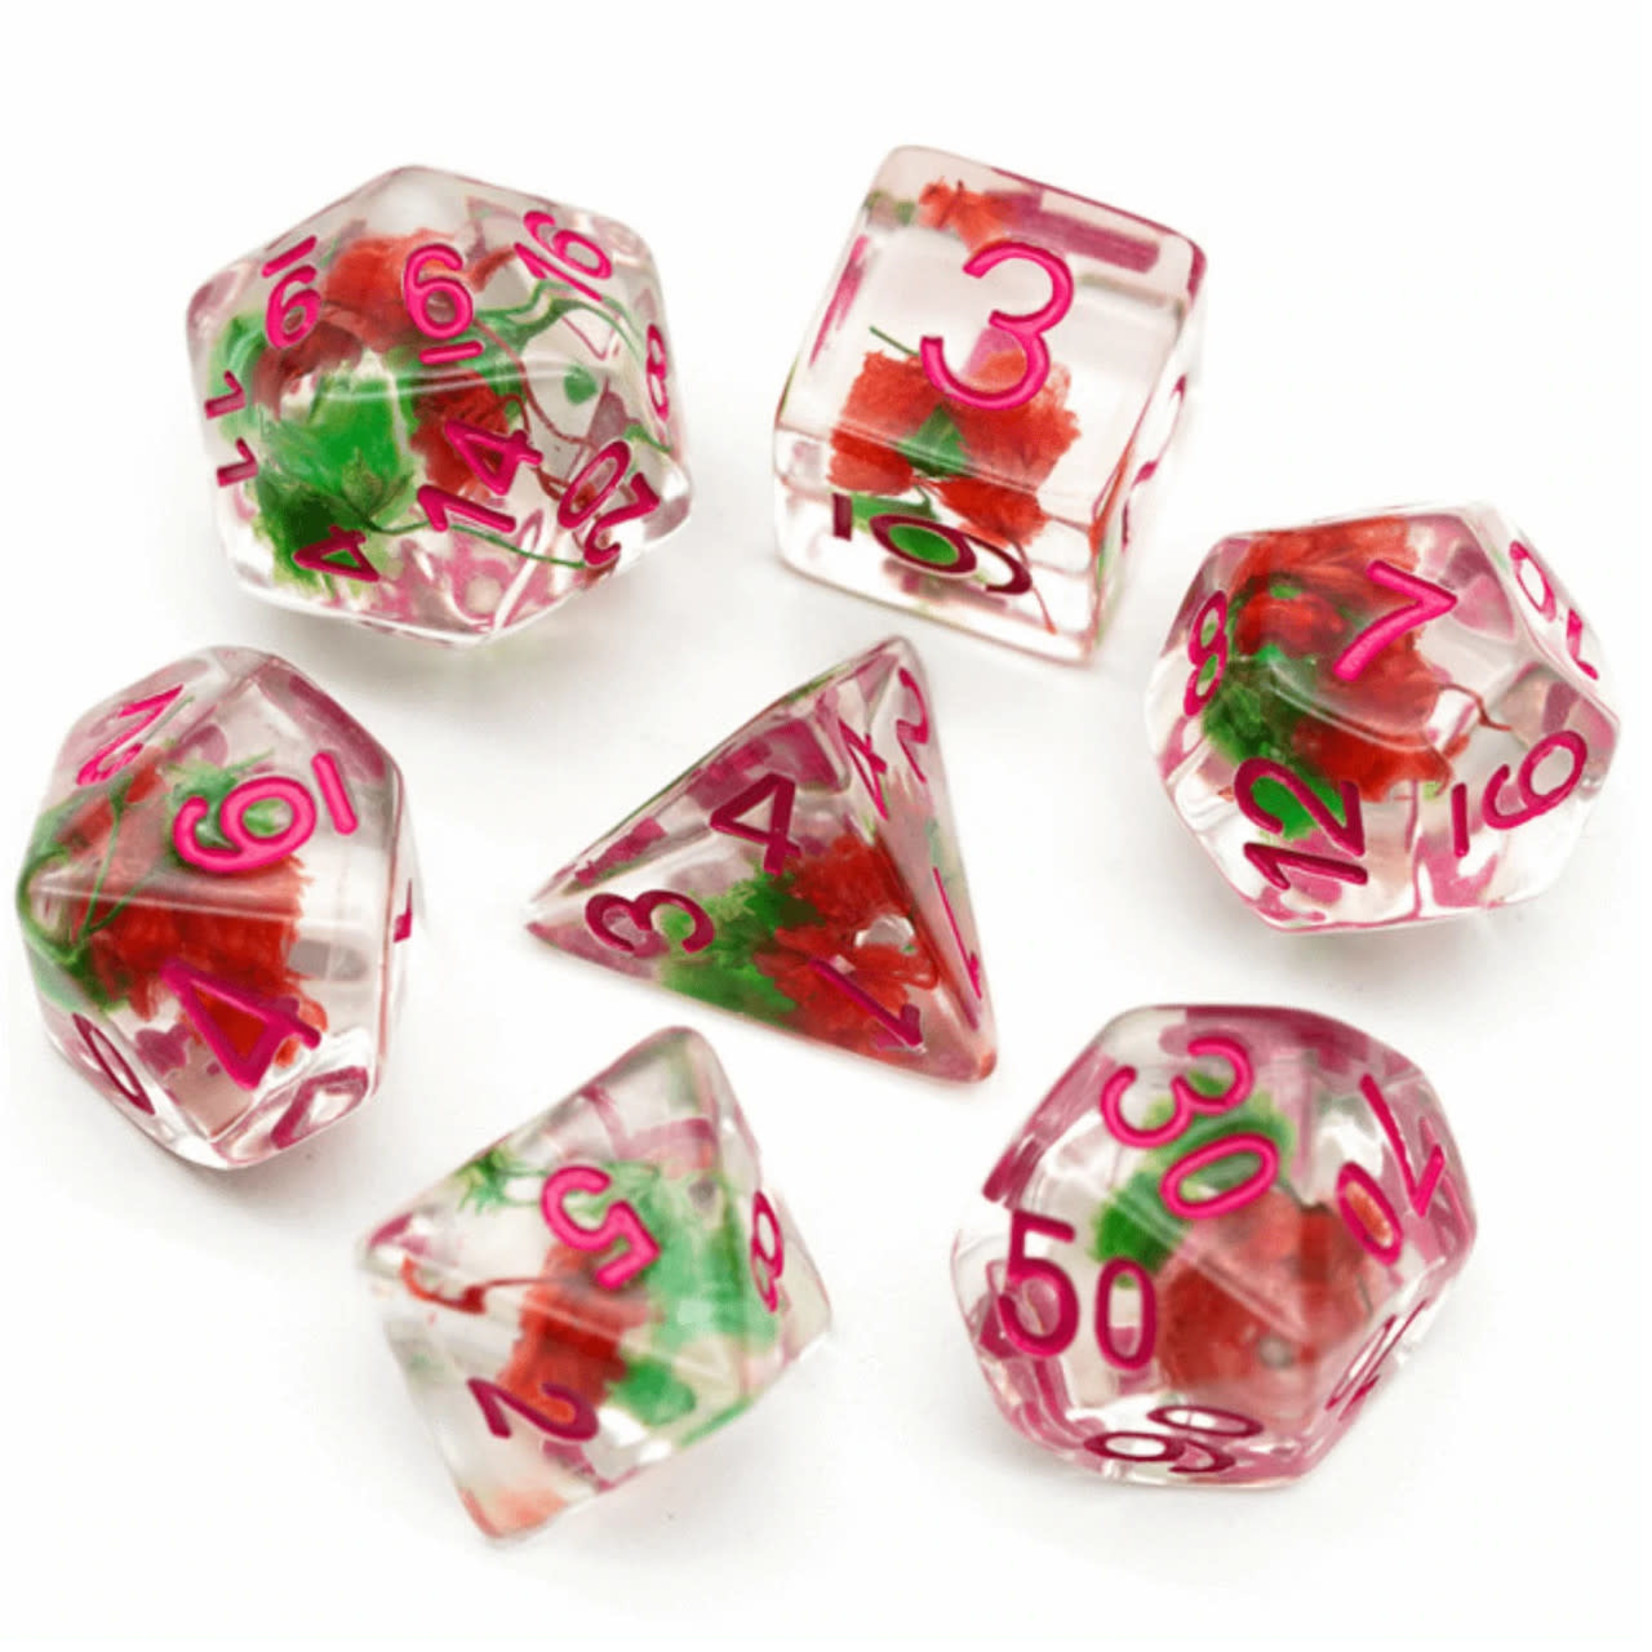 Alpha Precision Abrasives Dice RPG FBG1265 7pc Red and Green Flower